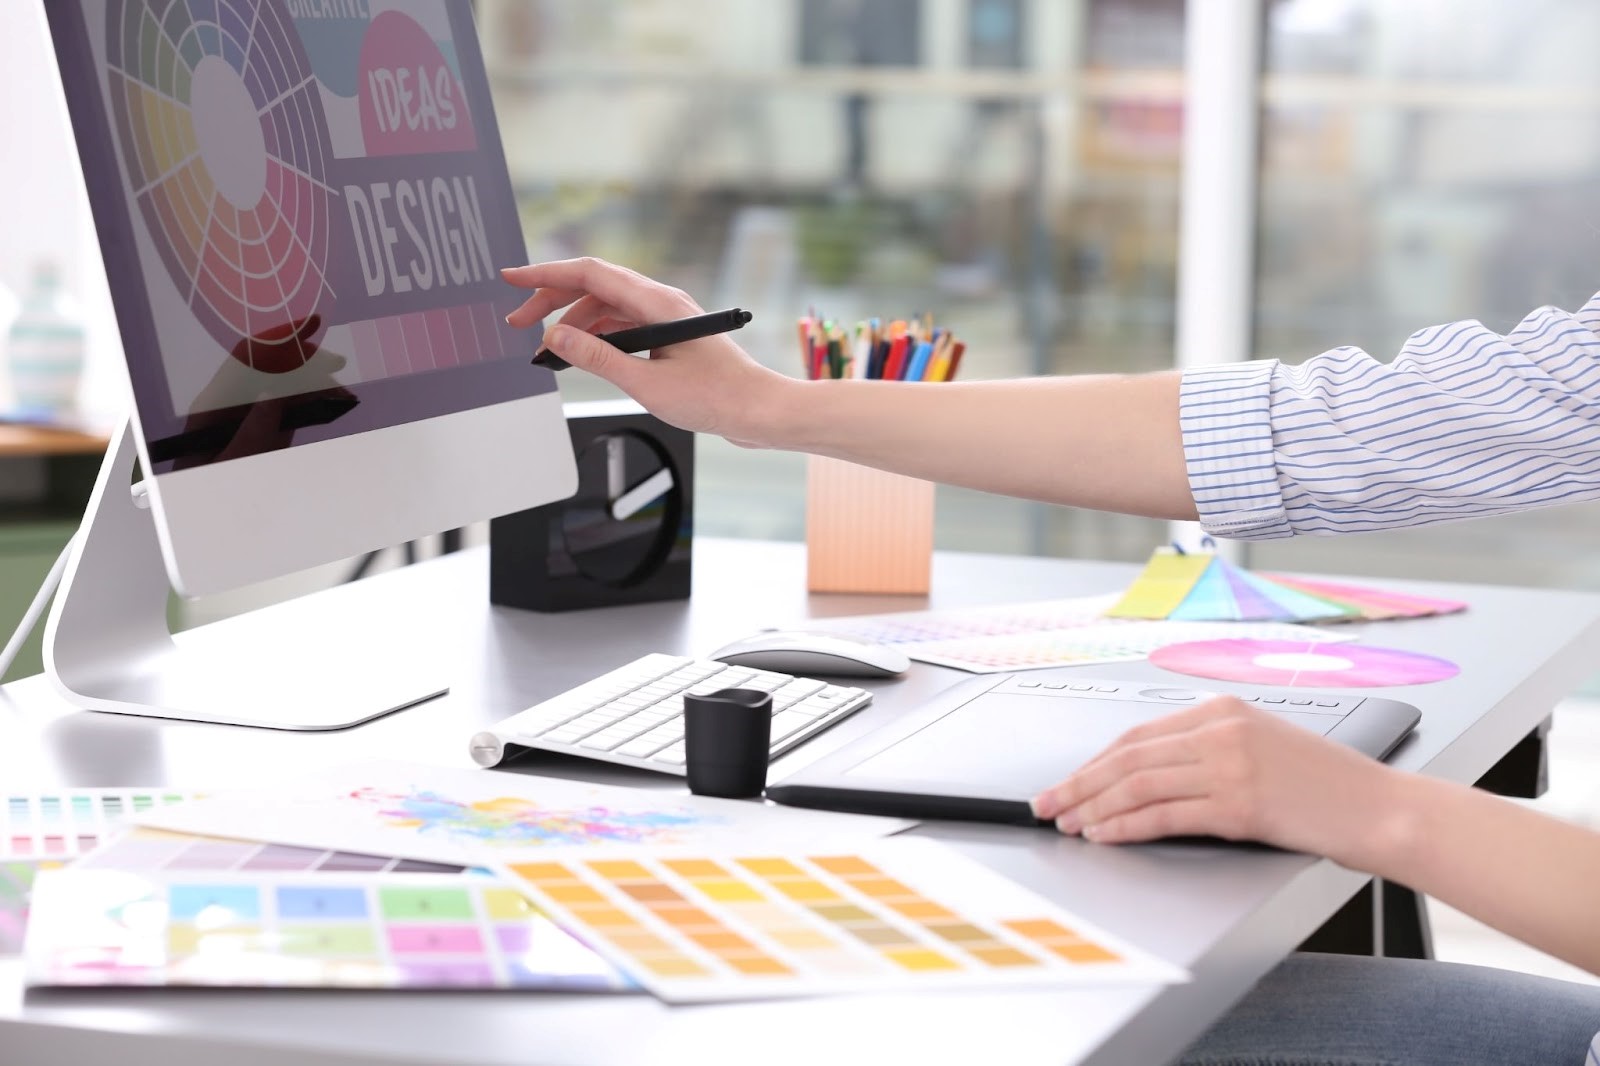 Graphic Design in Marketing: What Marketers Wish They Know